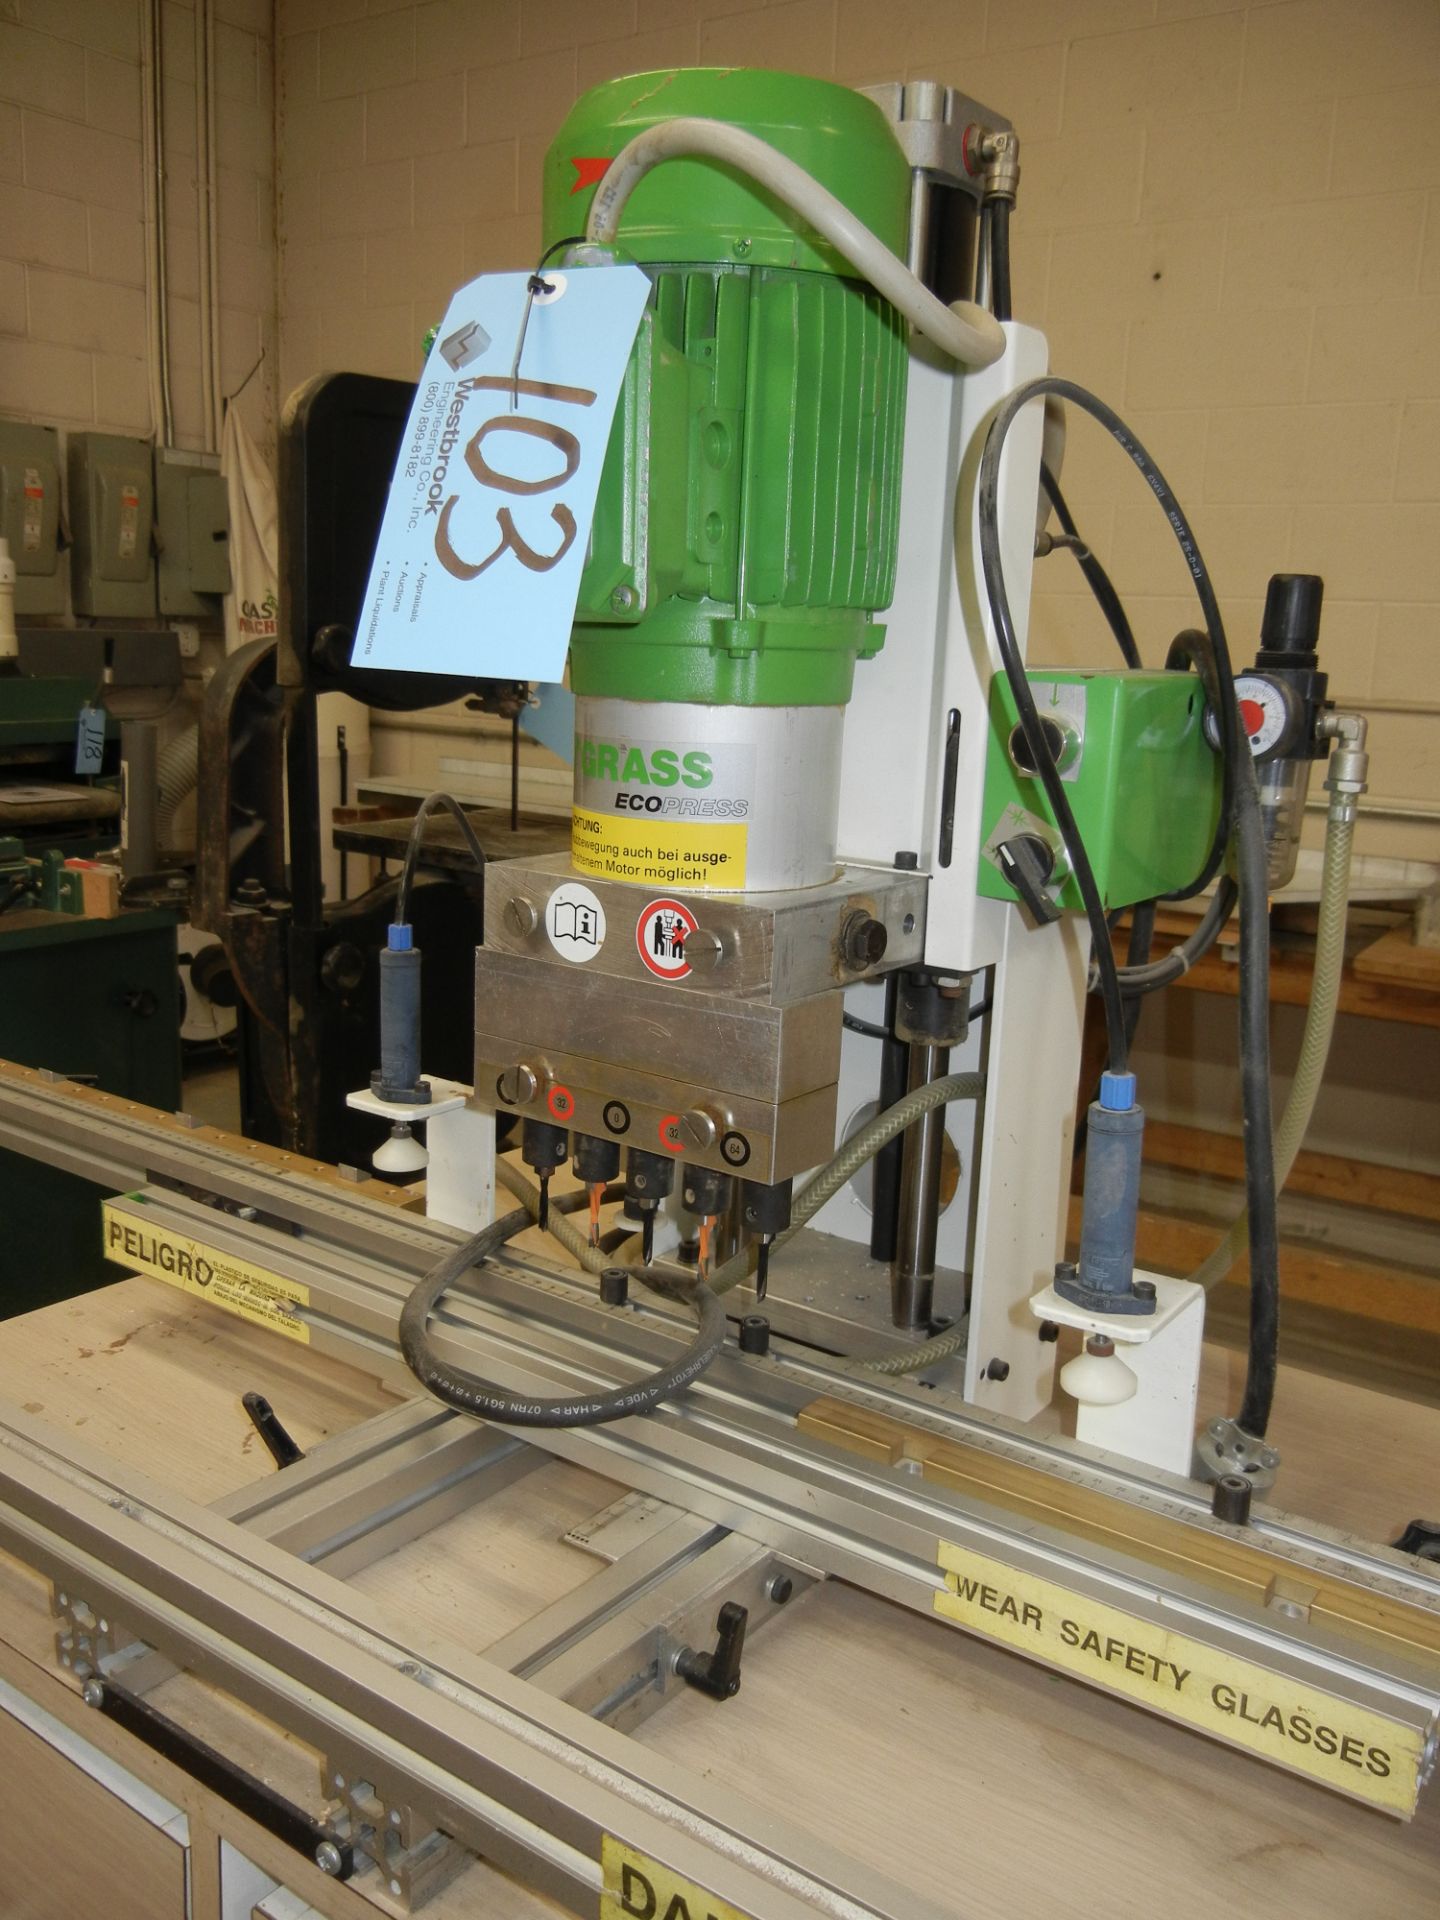 G Grass Type ECO PRESS-P; hinge boring & insertion machine; S/n 95091205; Cabinet Based; with Tools - Image 10 of 10